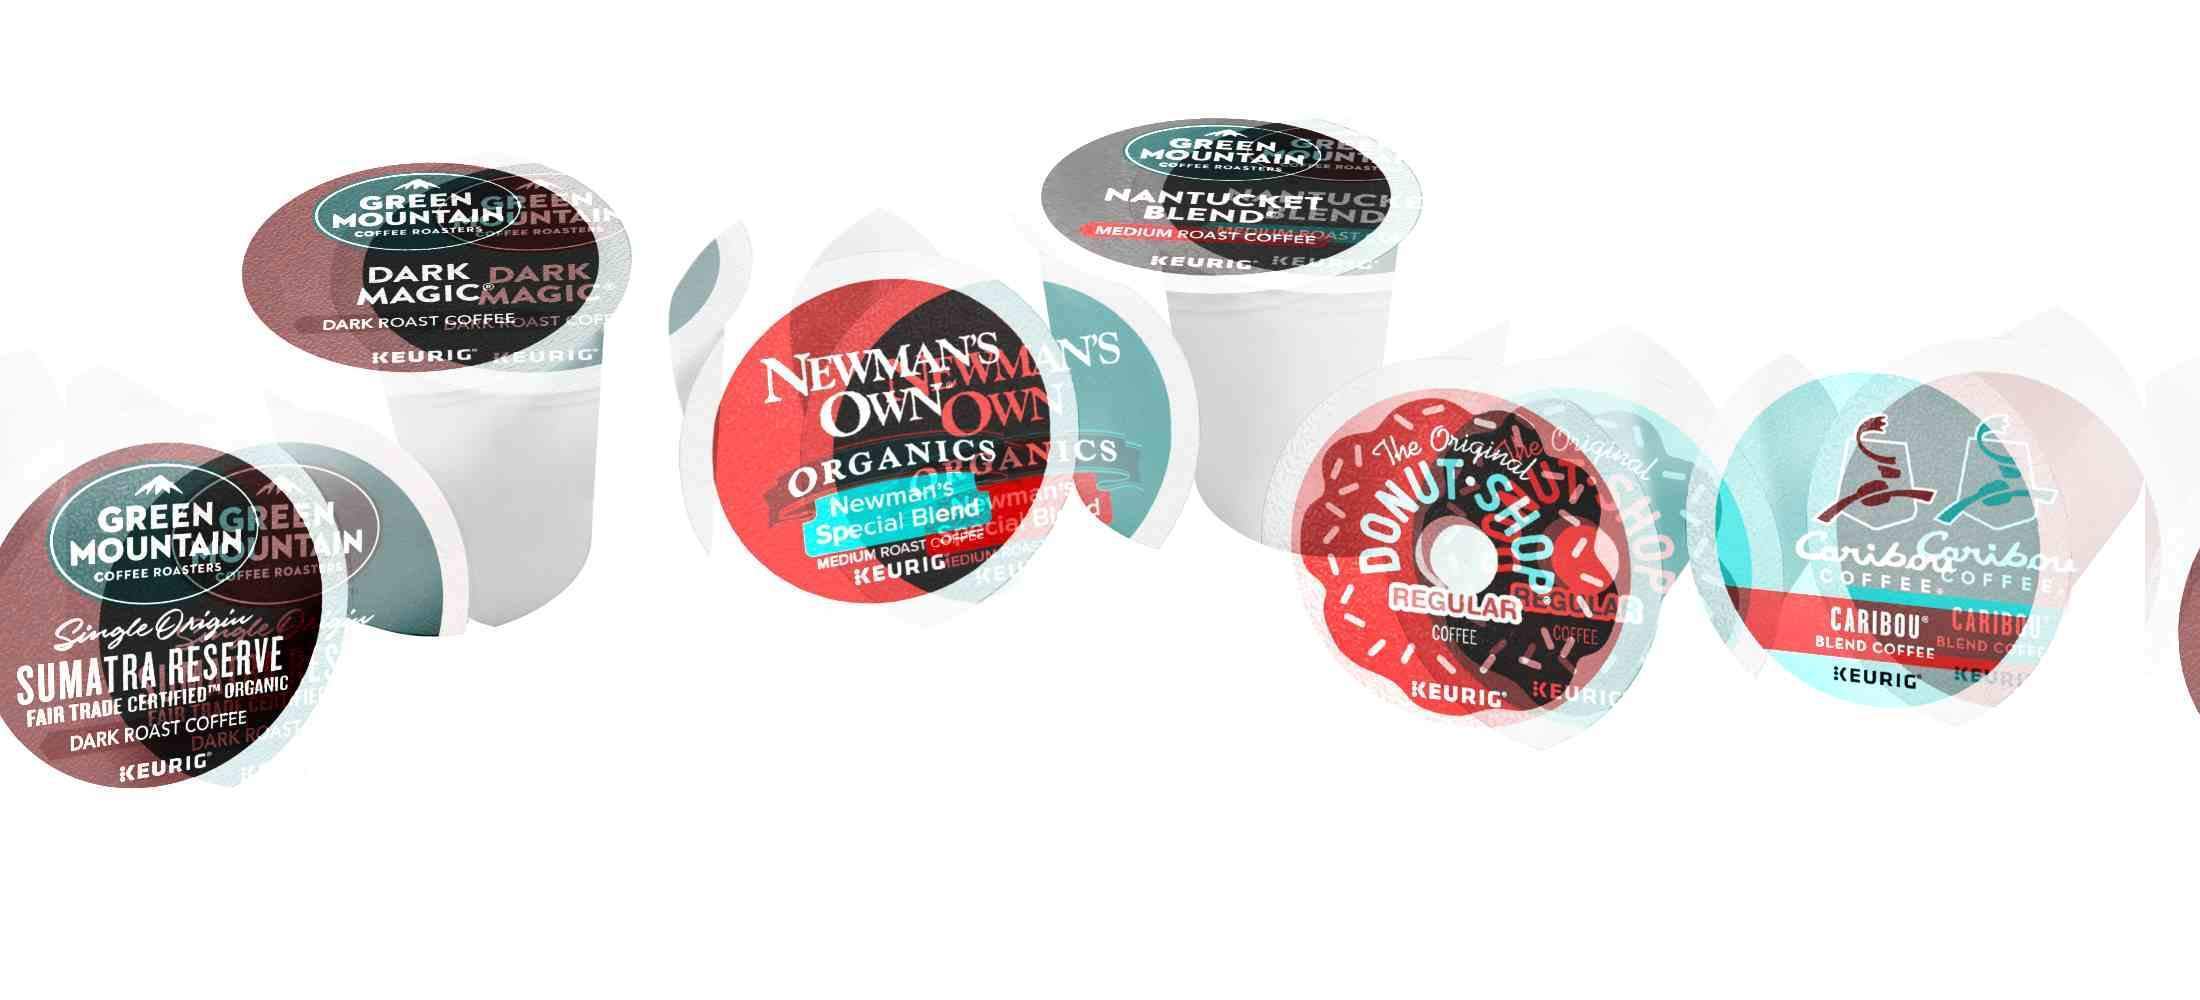 Here's What You Need to Know About the War on K-Cups